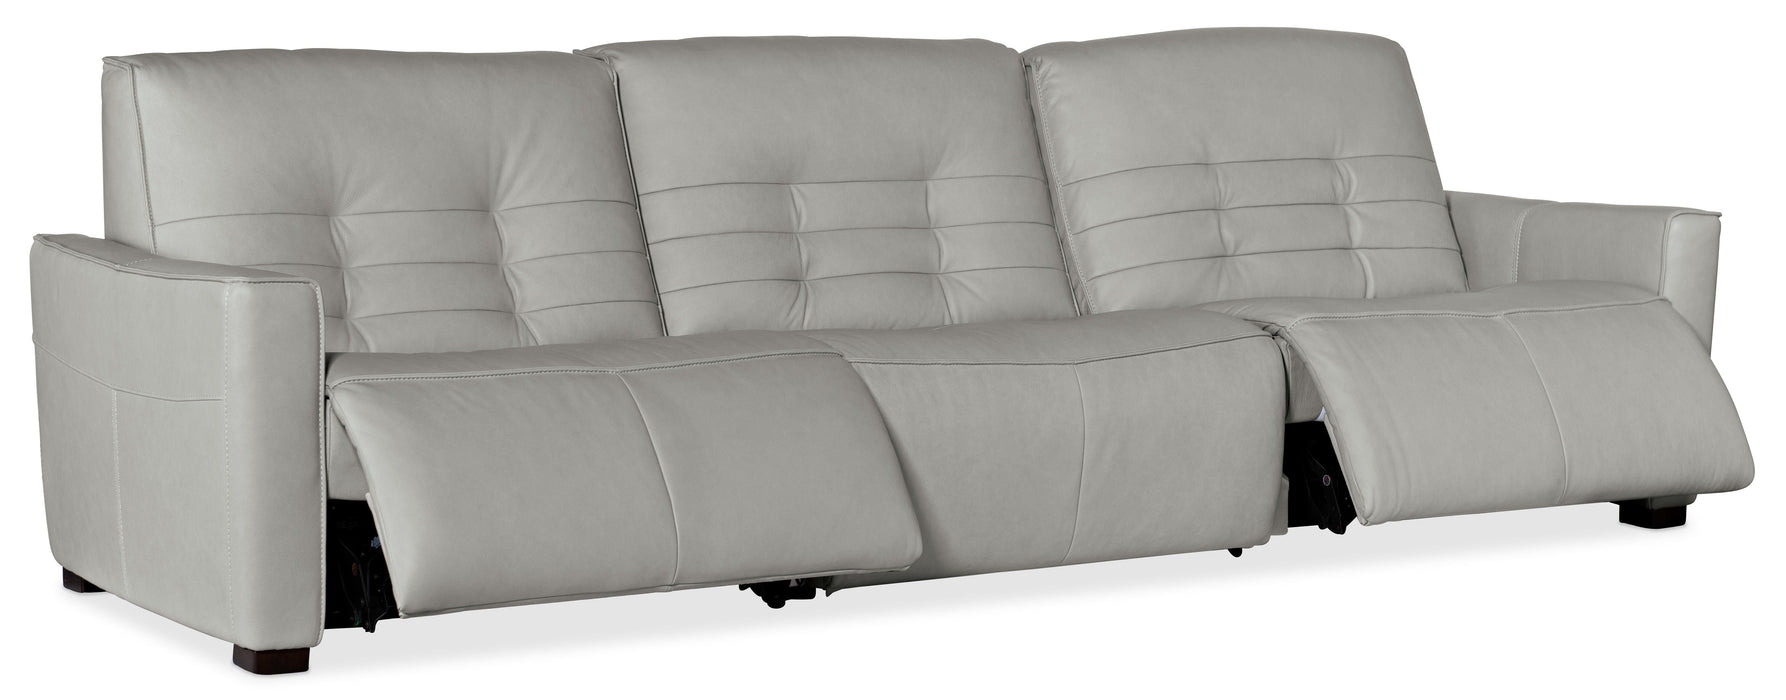 Reaux Power Recline Sofa With Power Recliners